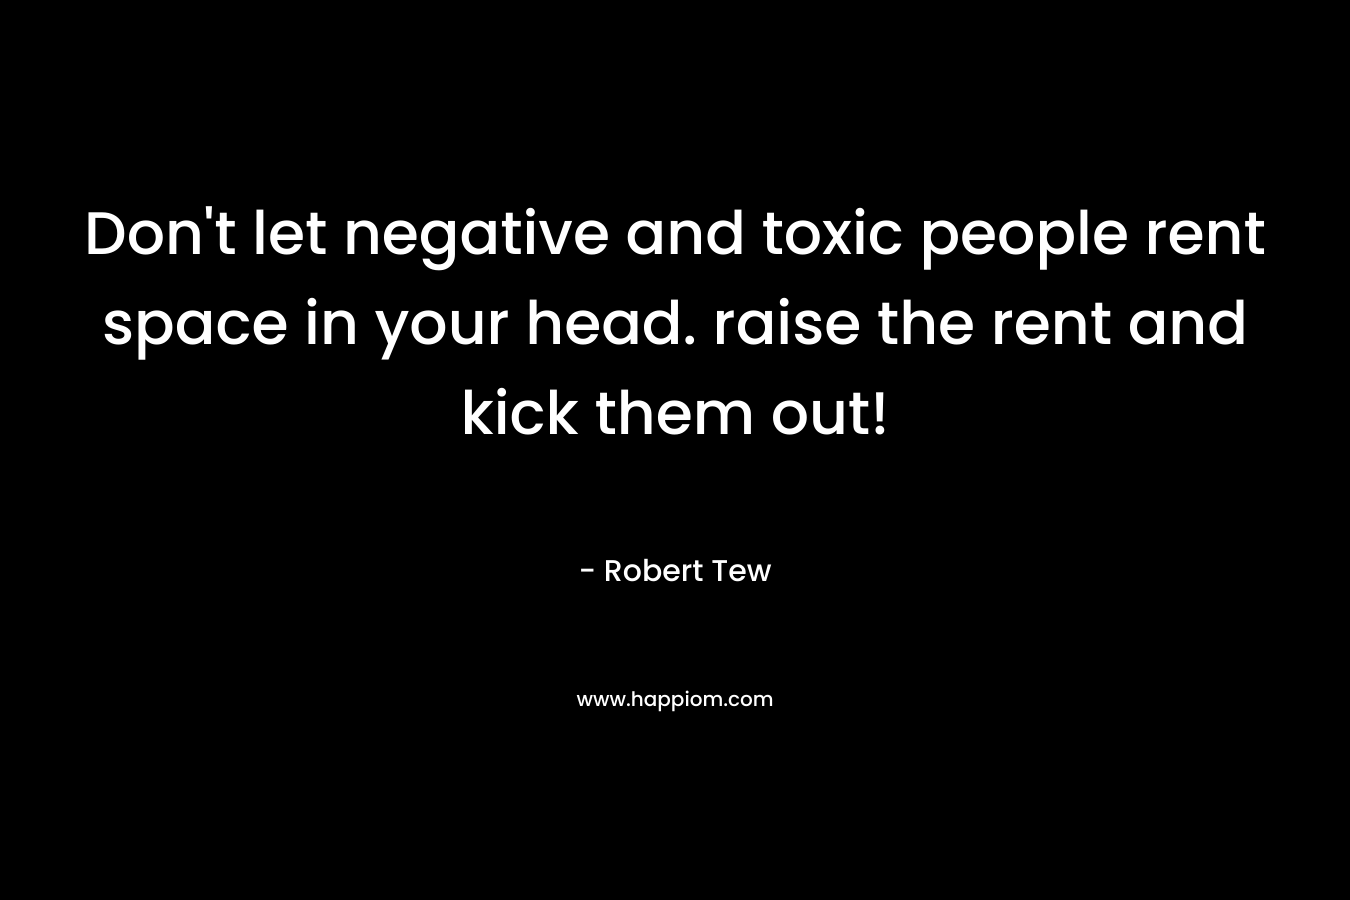 Don't let negative and toxic people rent space in your head. raise the rent and kick them out!